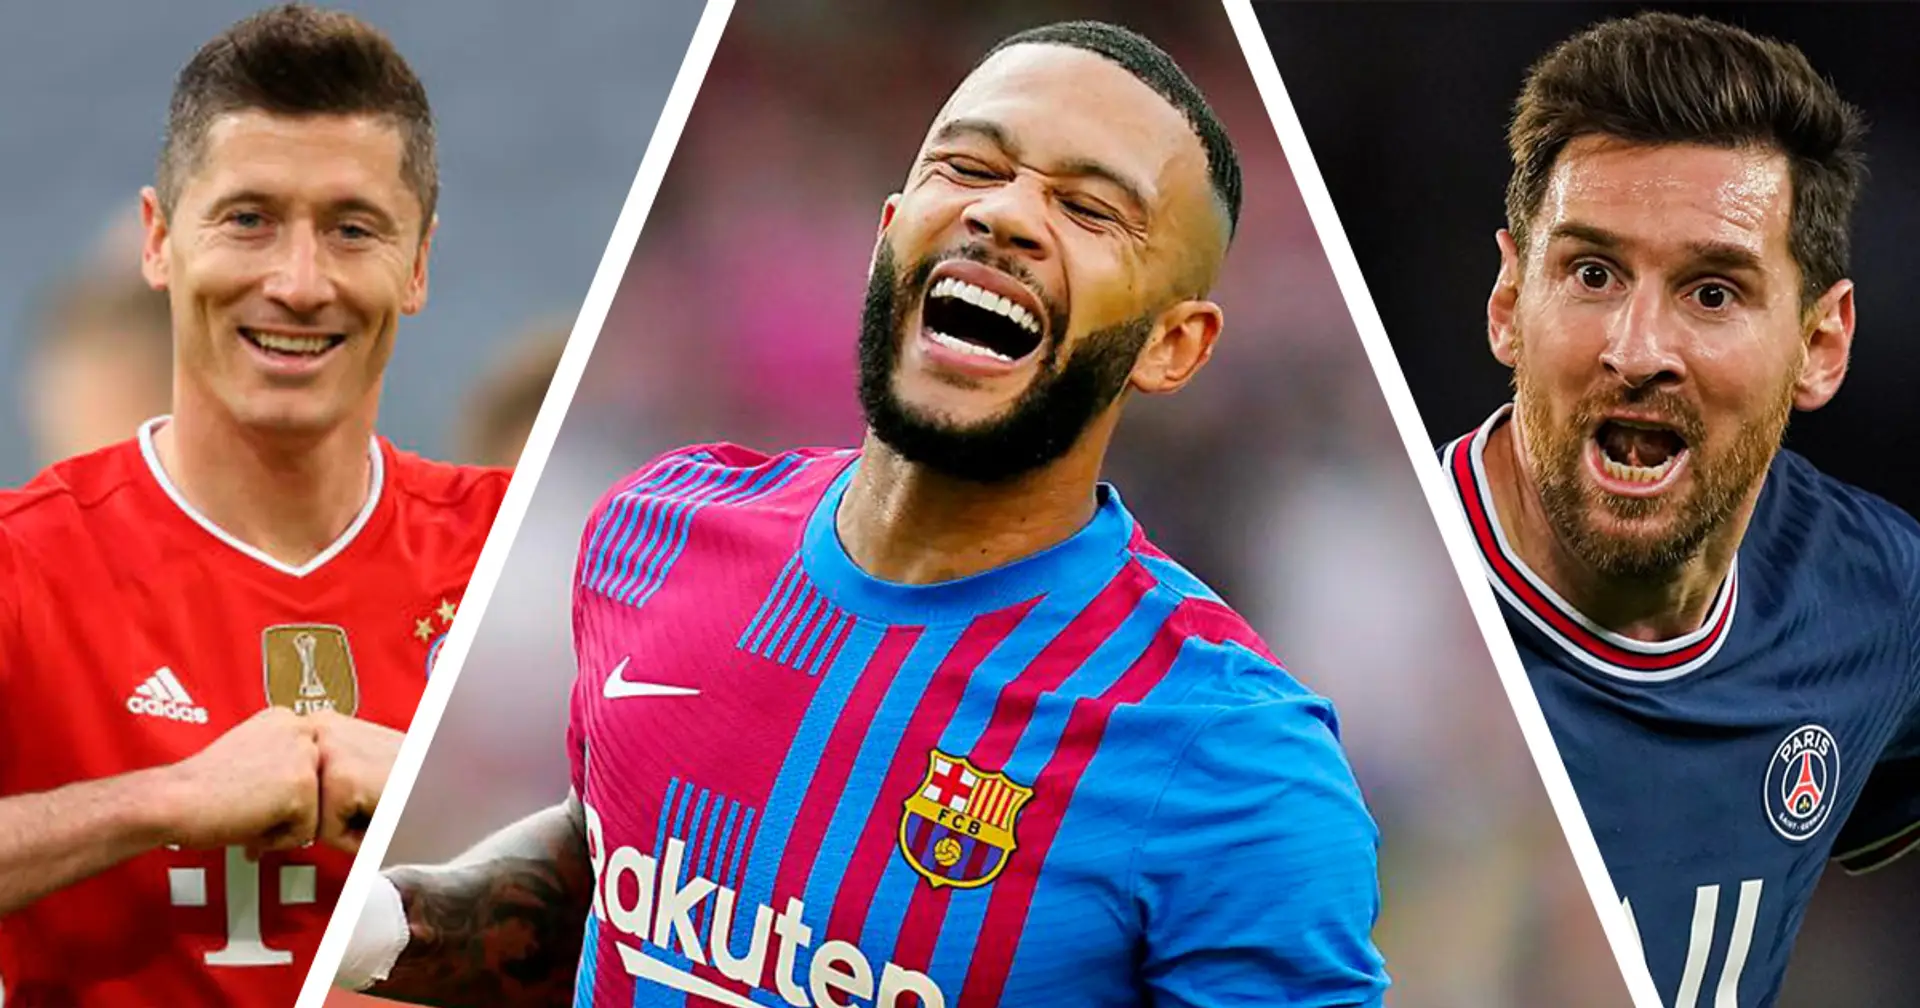 Messi 2nd, Memphis 9th: Players with most goal contributions in 2021